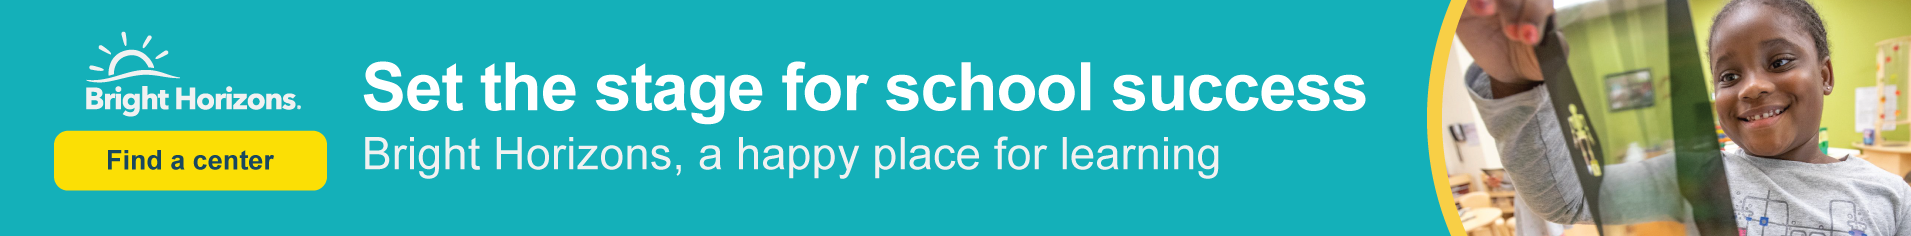 https://voiceamerica.com/shows/4199/be/School Readiness - TPL Ad Banner 1 .png